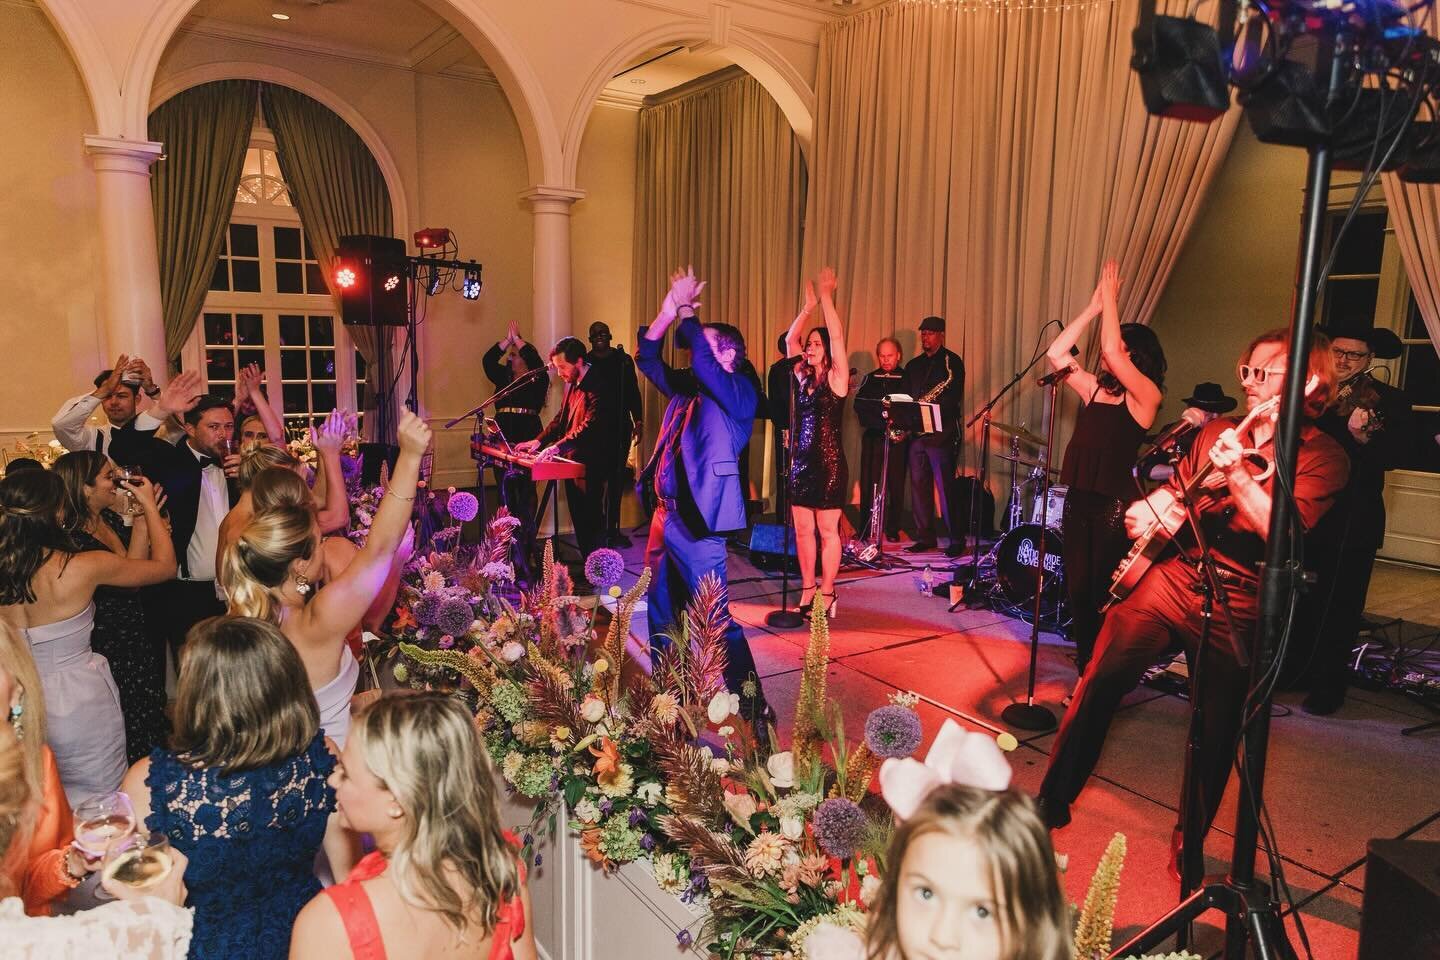 Hands in the air if you're ready to party with us. 🎵

📸: @lesliehollingsworthphoto 

Whether you're planning a corporate event, a private party, a wedding celebration, or any event that calls for an unforgettable live music experience, we guarantee